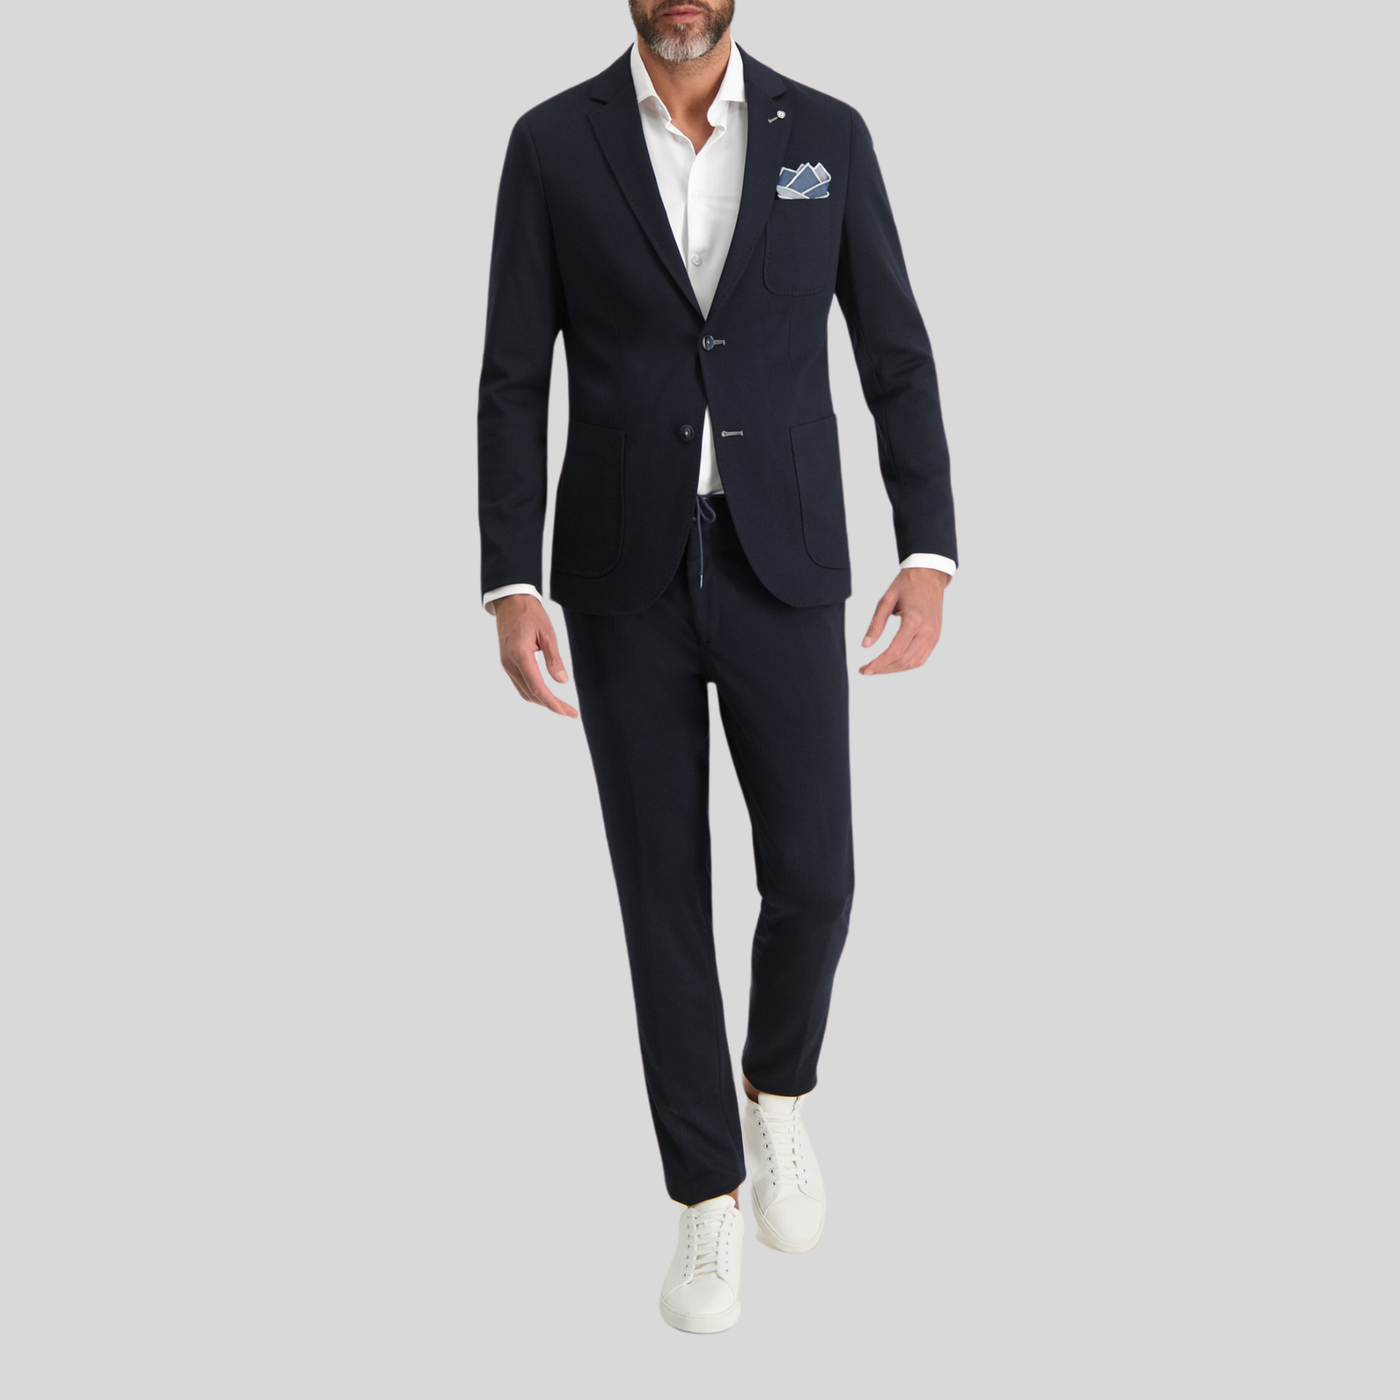 Gotstyle Fashion - Blue Industry Suits Jersey Drawstring Chinos - Dark Navy